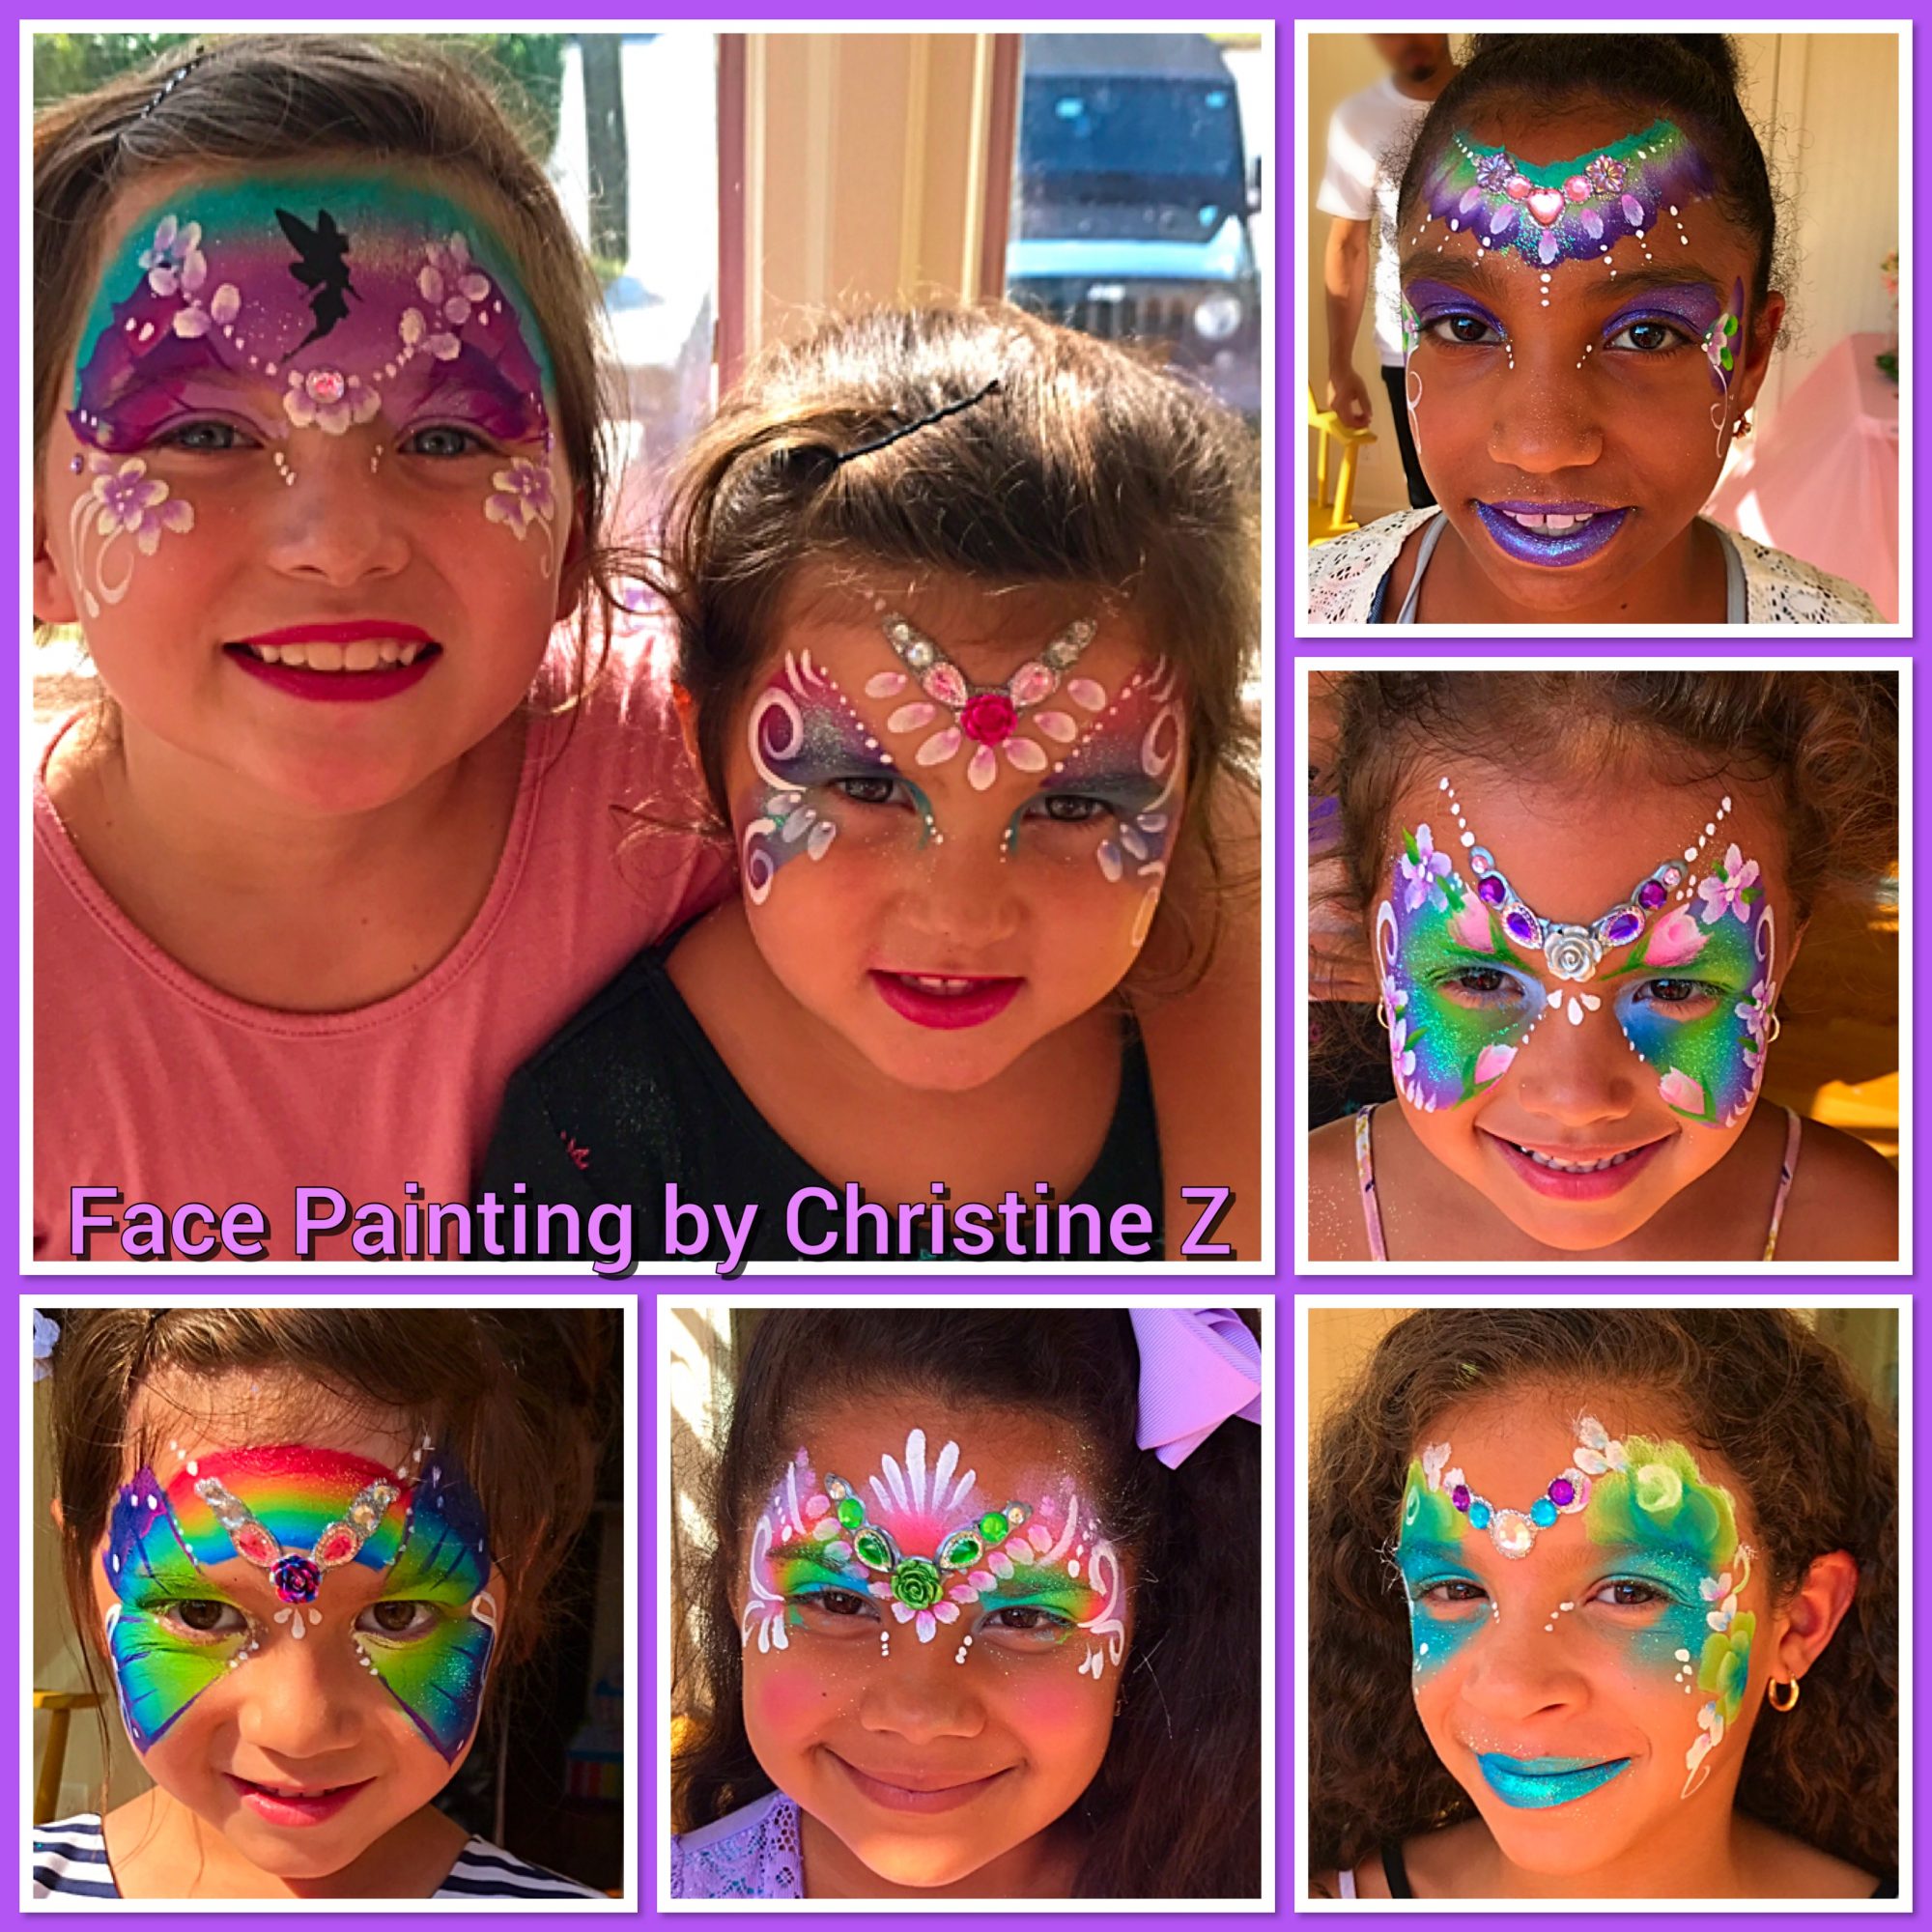 Face Painting by Christine Z